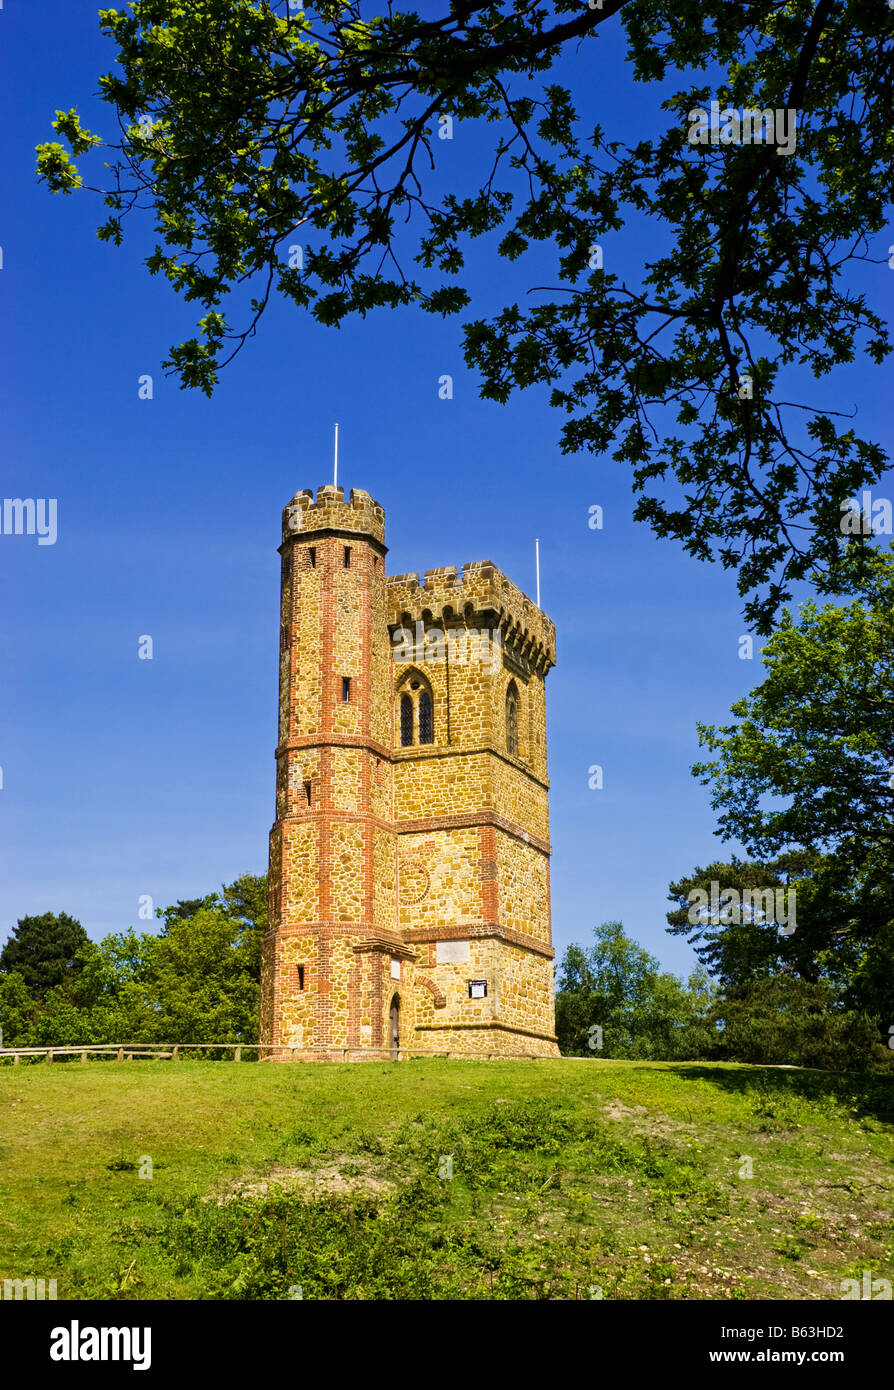 Leith Hill Tower, Surrey, UK Banque D'Images